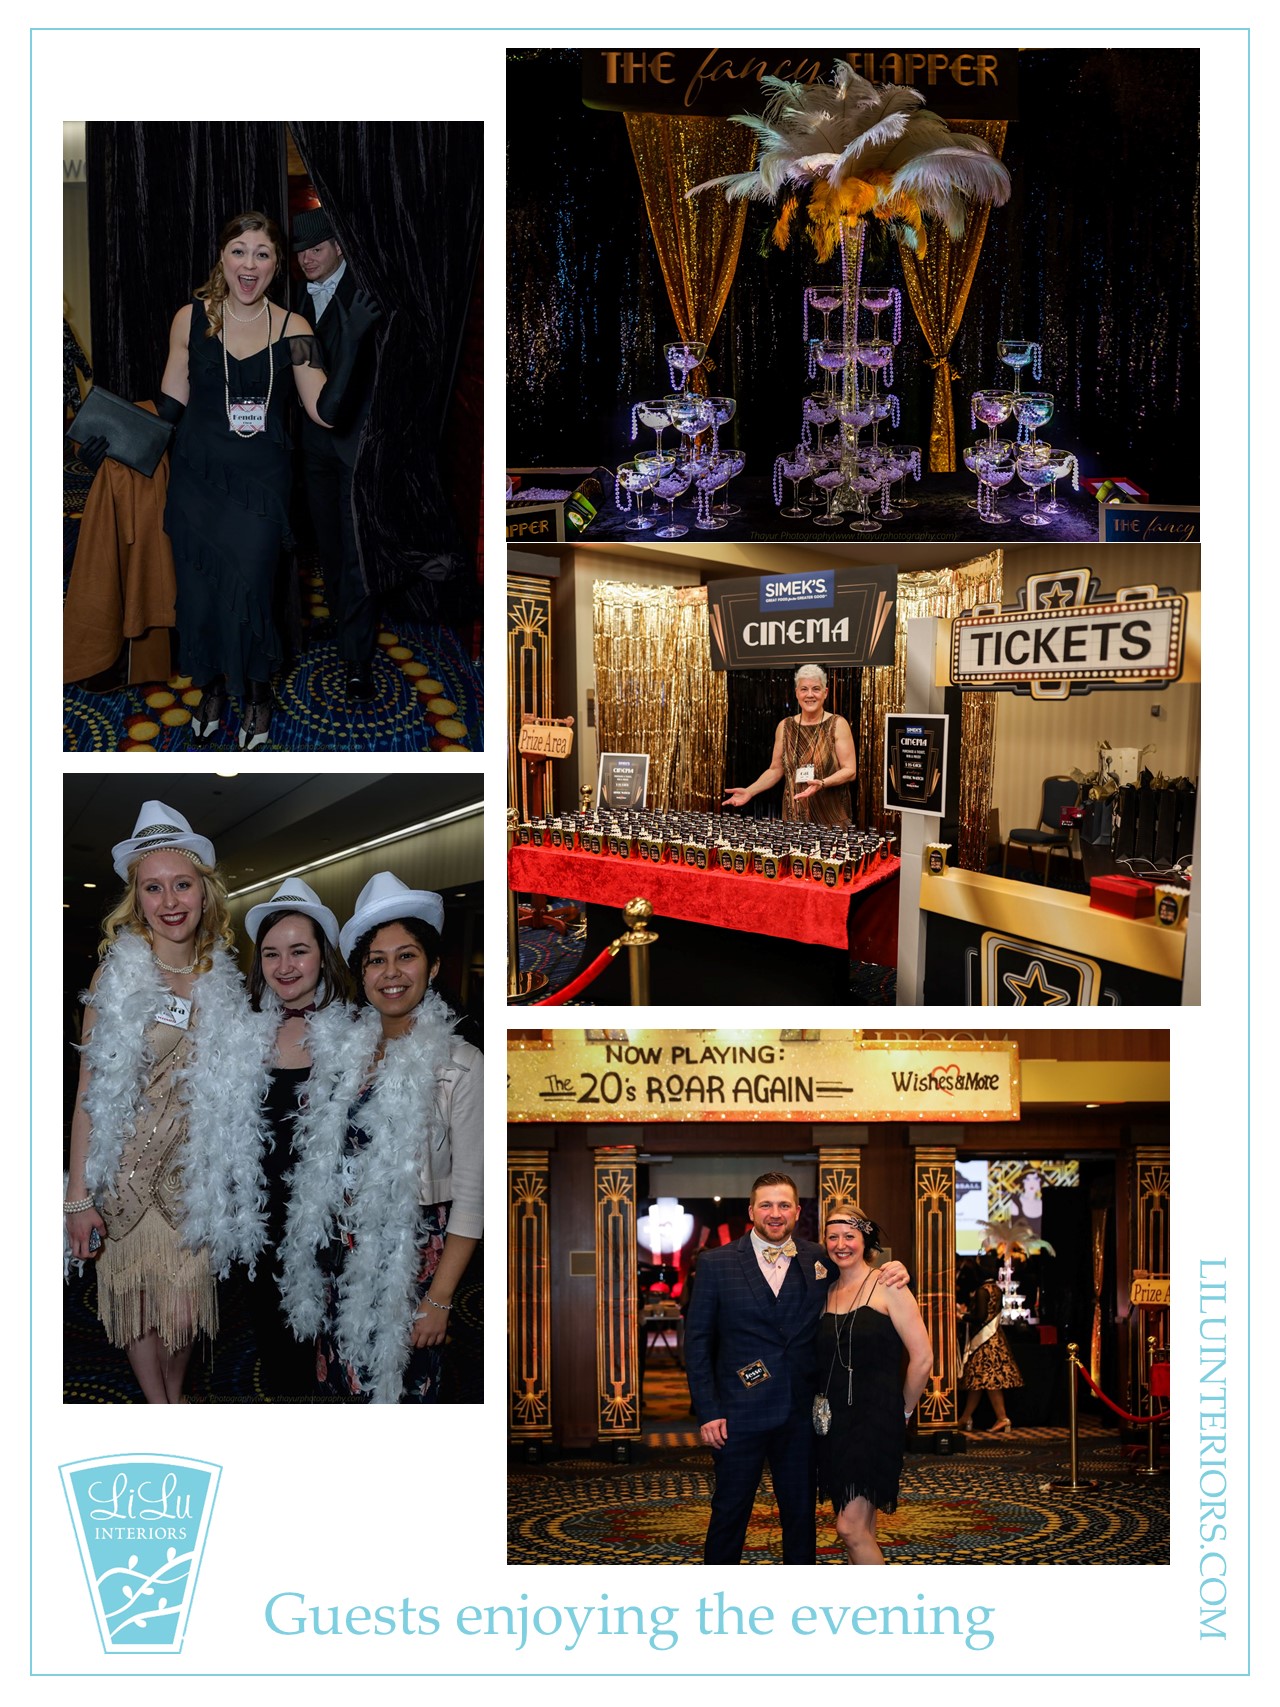 The 20's Roar Again Charity Event